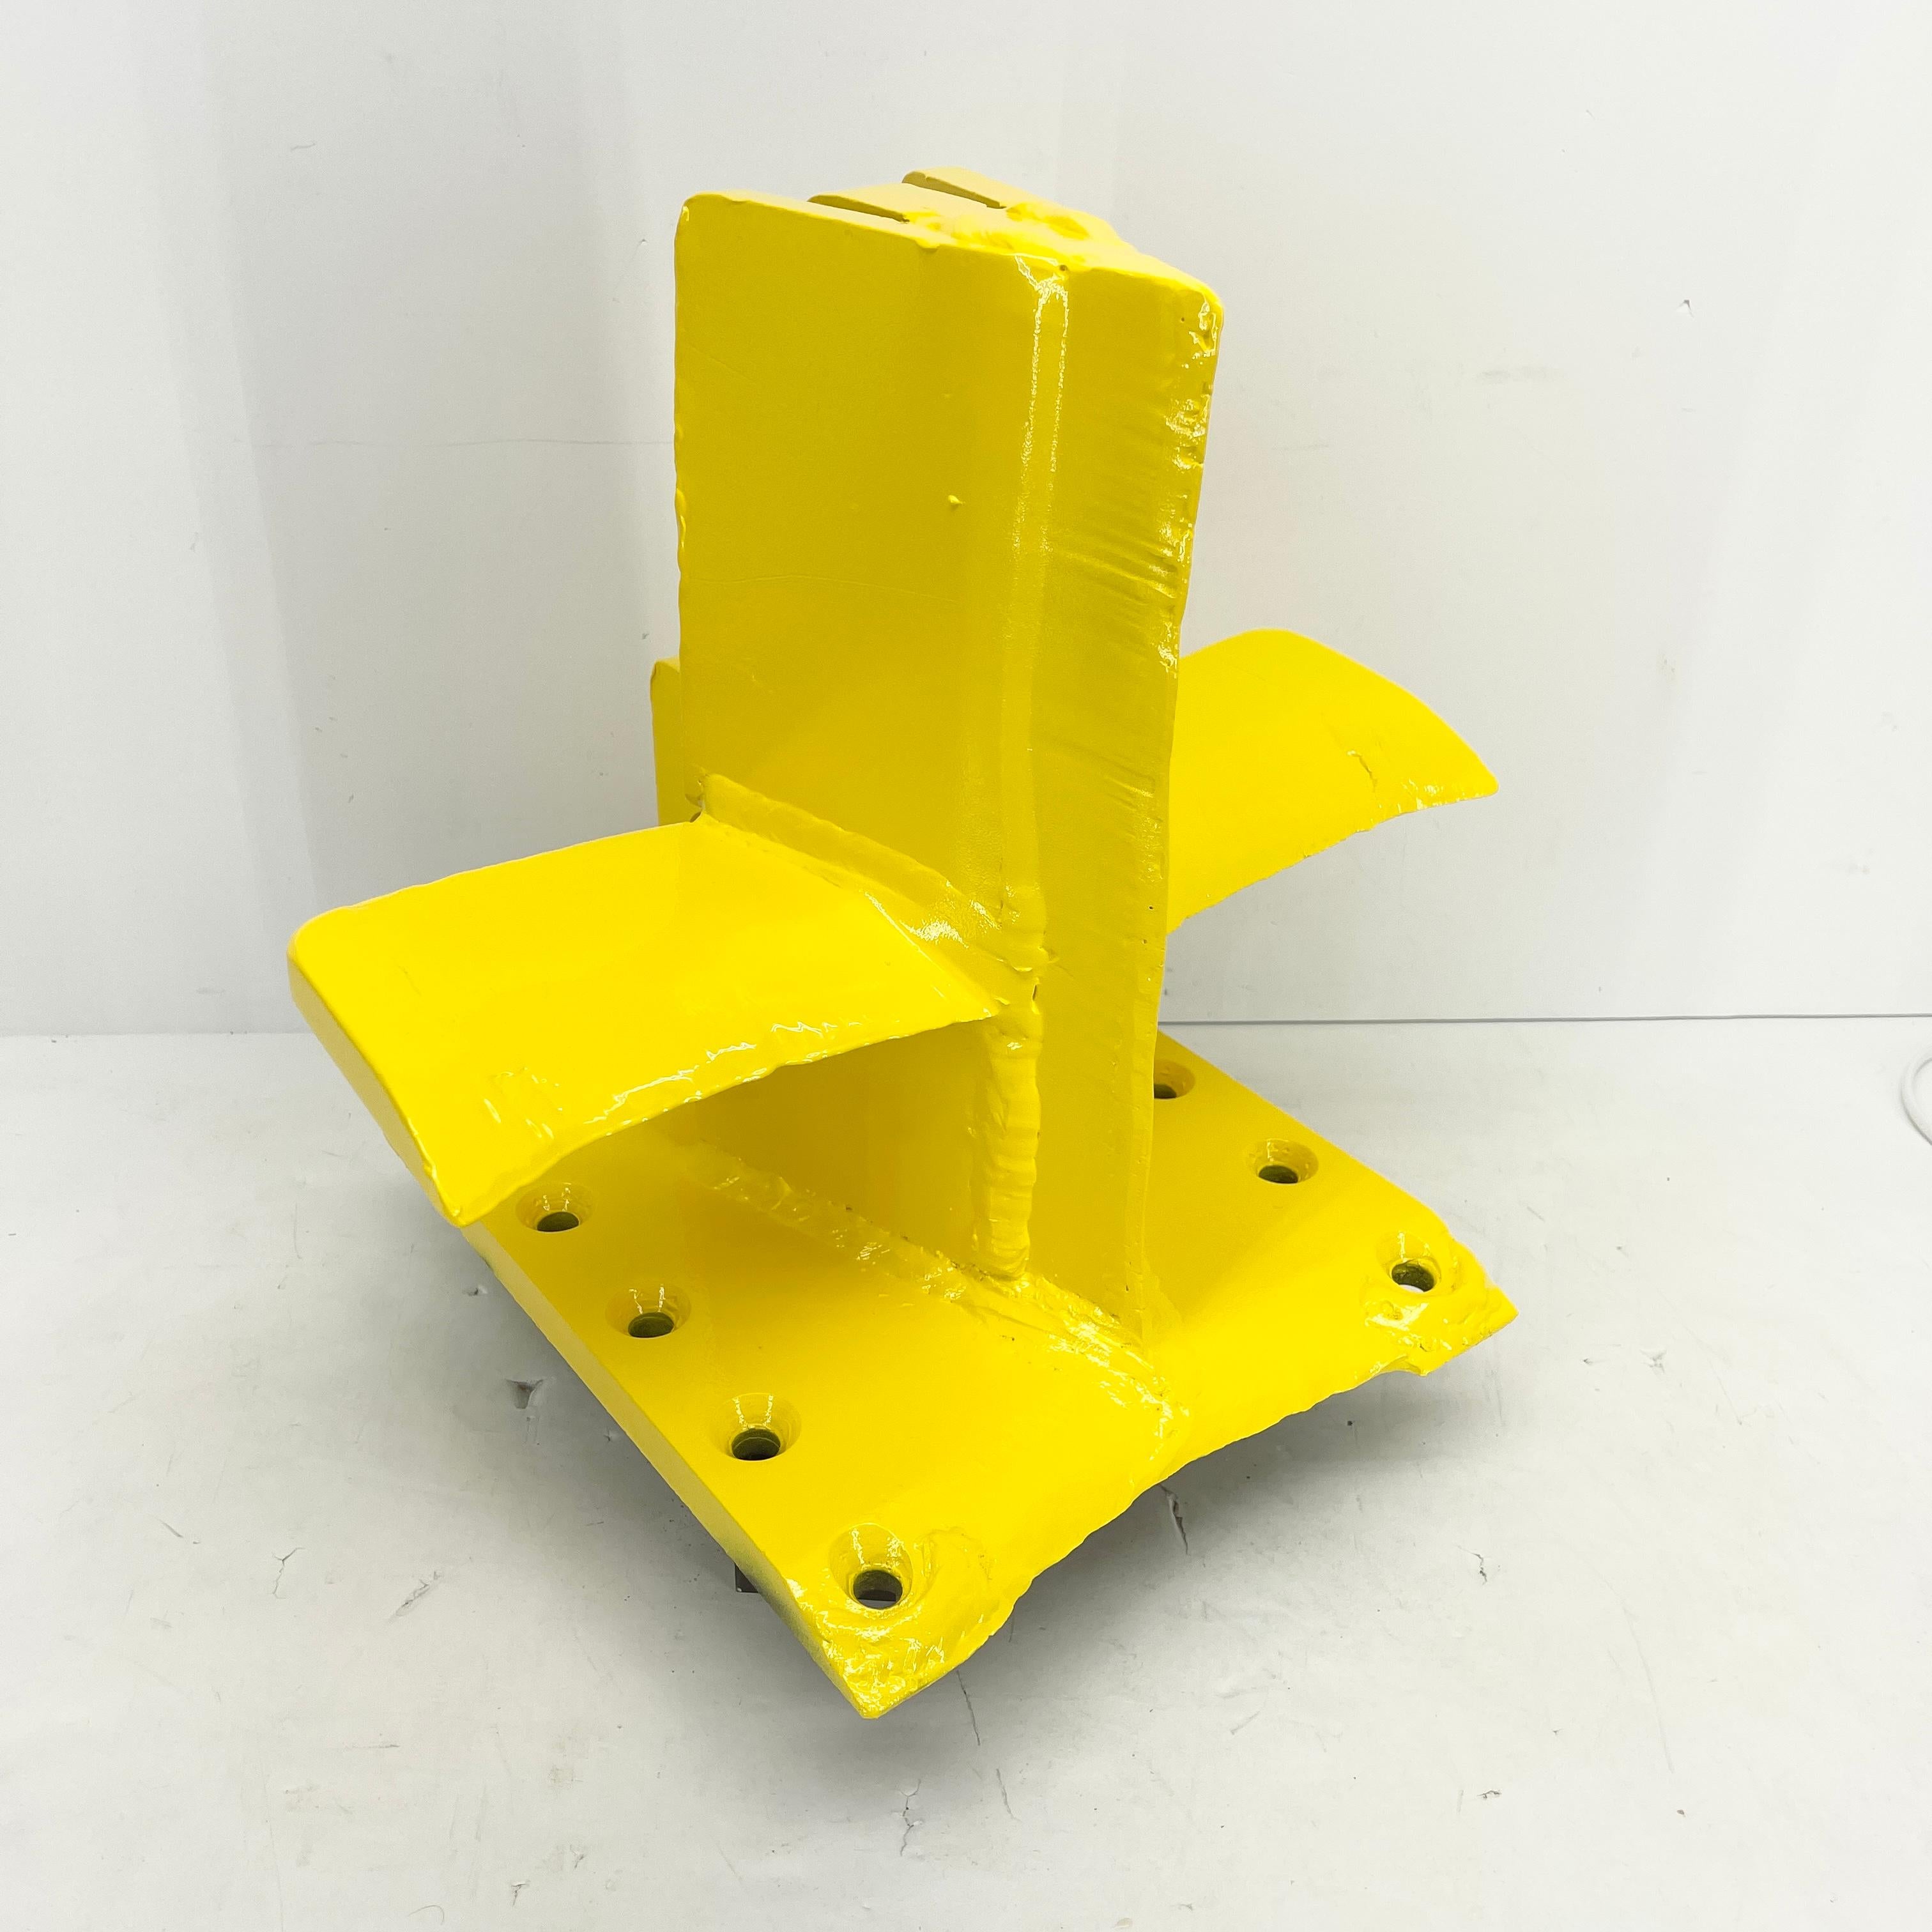 Bright Sunshine Yellow Abstract Eagle Head Sculpture From a 3 Way Wood Splitter For Sale 7